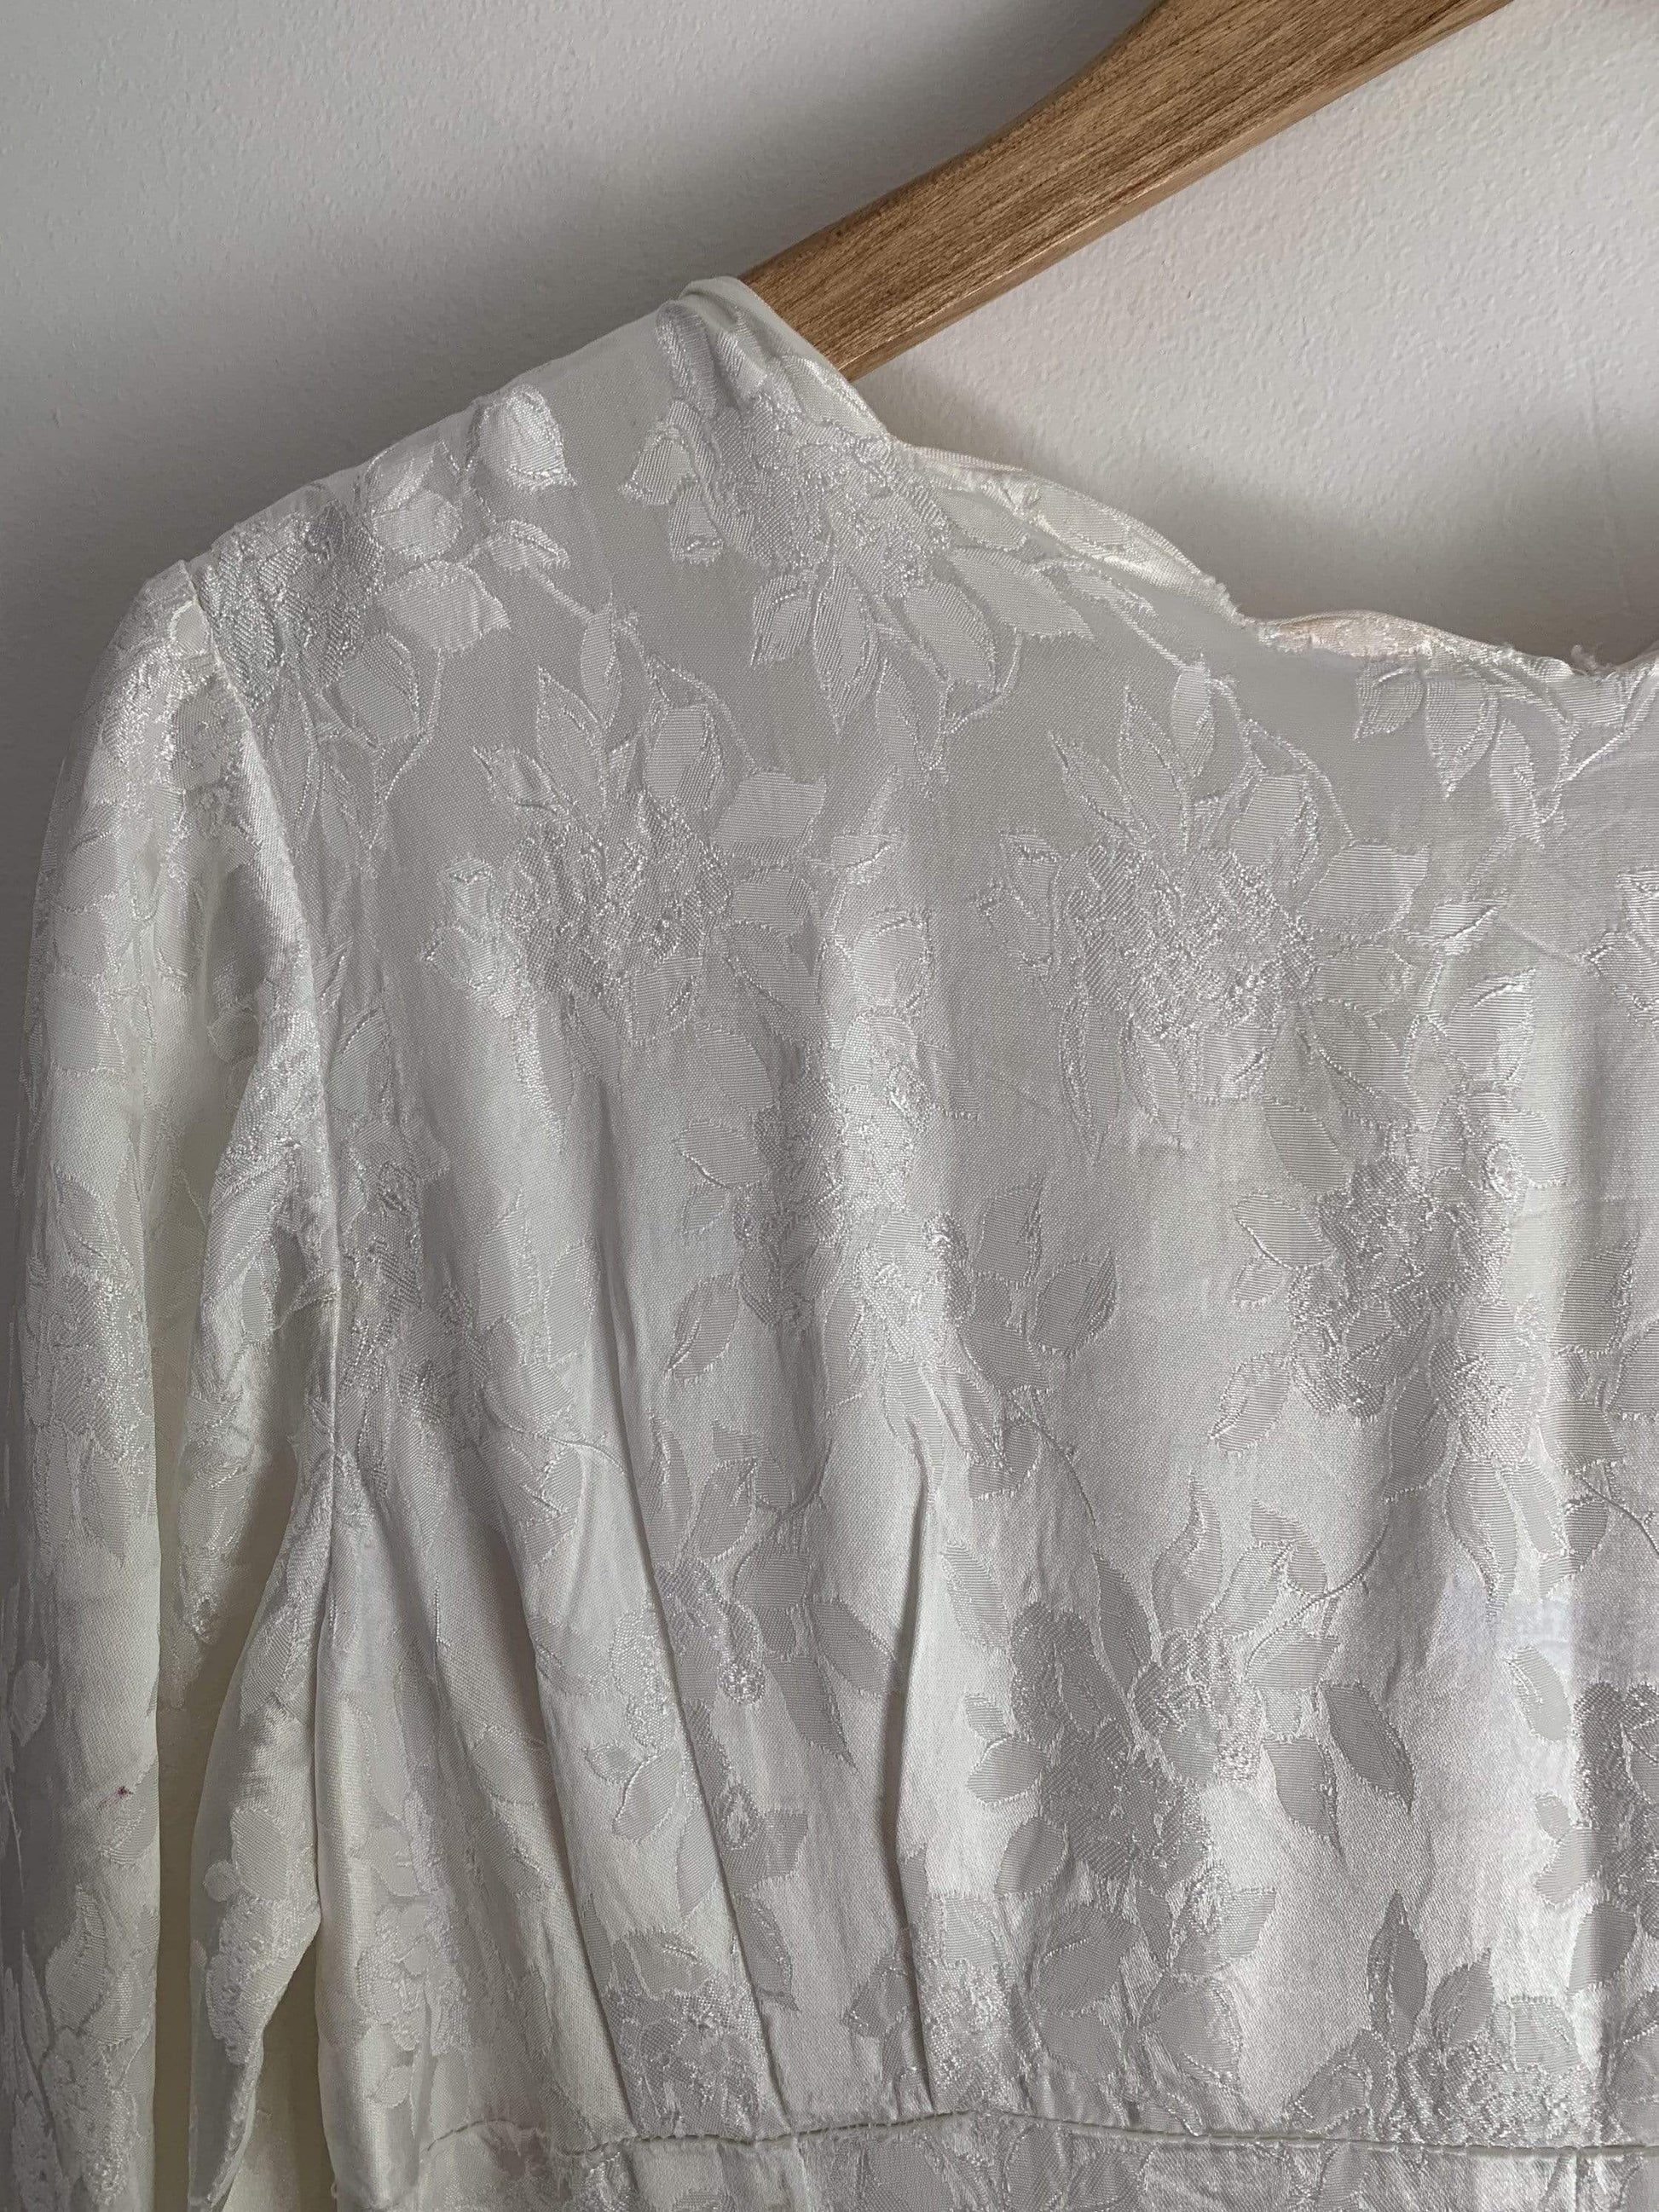 1950s Vintage Wedding Dress Pretty Vintage - Hand Curated Vintage Clothing 1950s Vintage Wedding Dress 1950s 50s Handmade Ivory with lovely floral full skirt